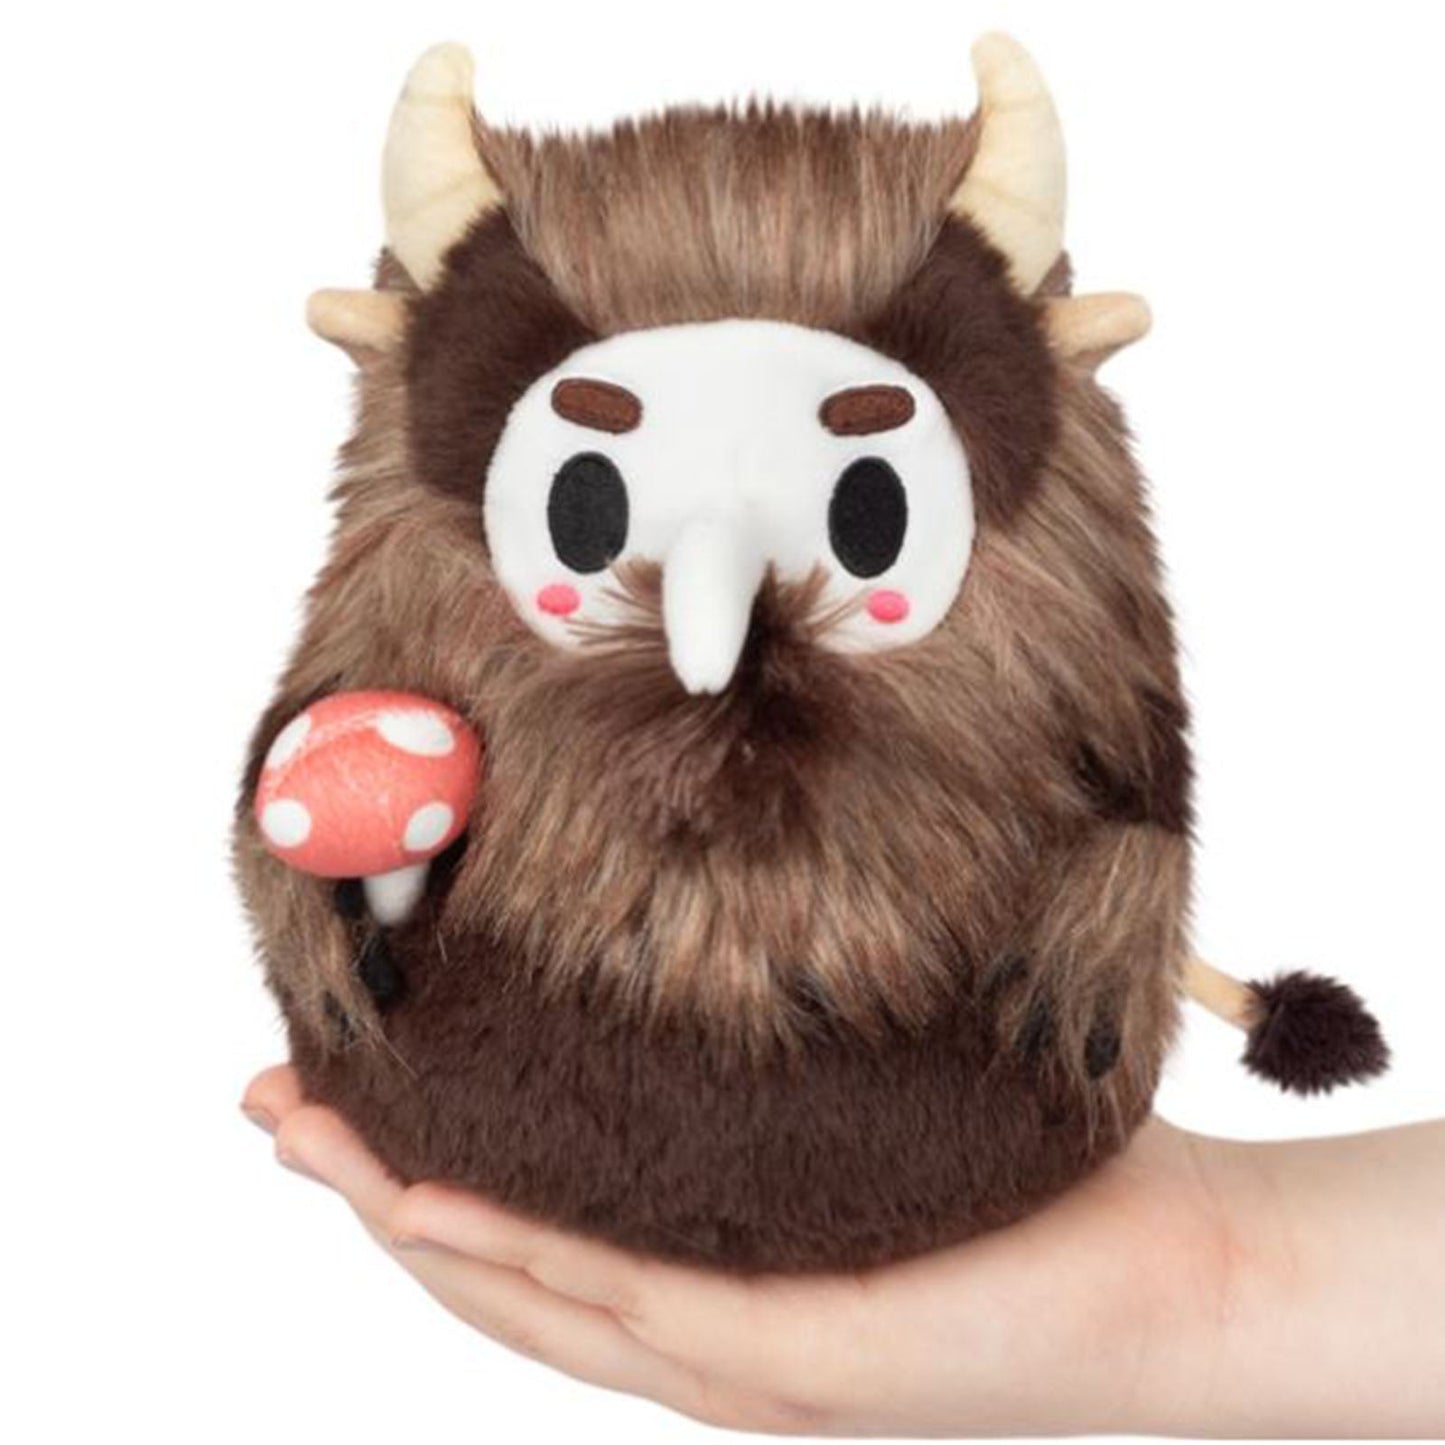 Squishable Alter Ego Plague Doctor Beast 6 Inch Plush